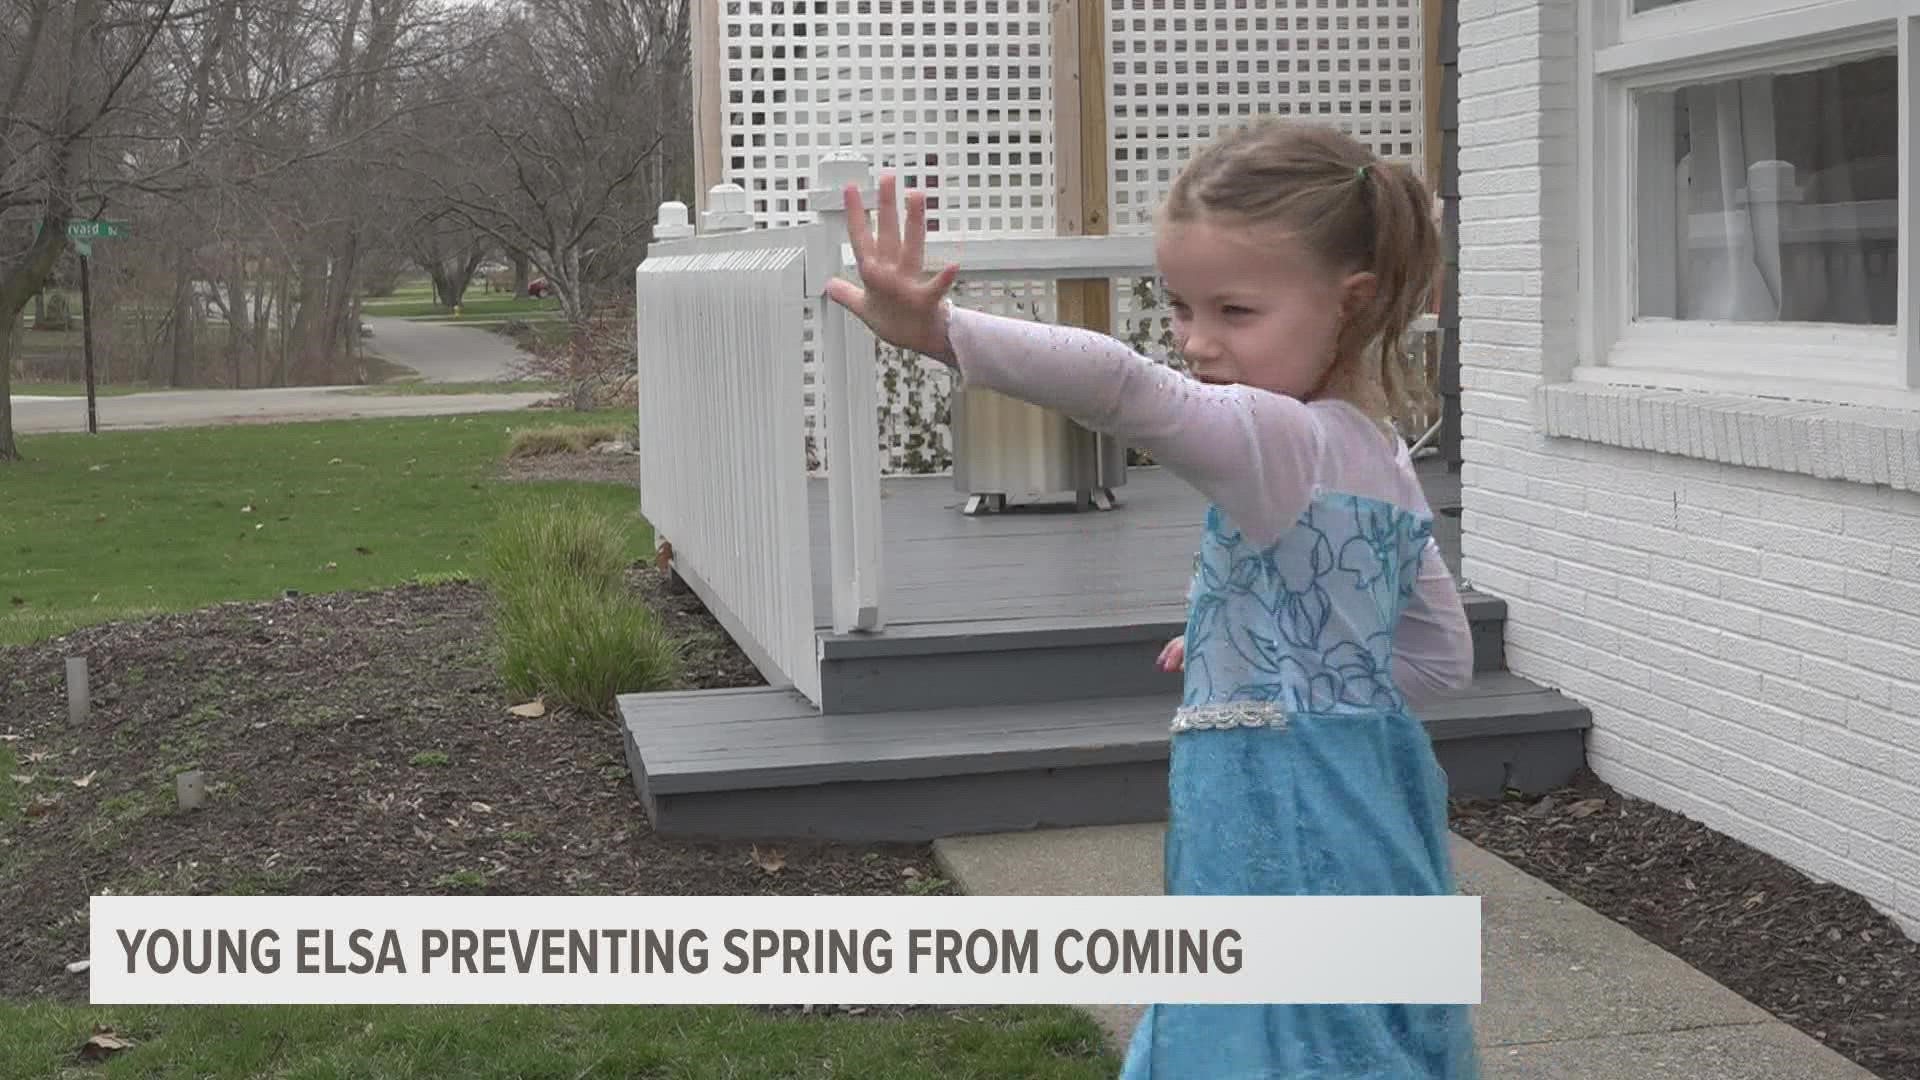 Remy Willink and her dad's rendition of a song from "Frozen", calling out snow in April, went viral on TikTok with more than 5 million views.